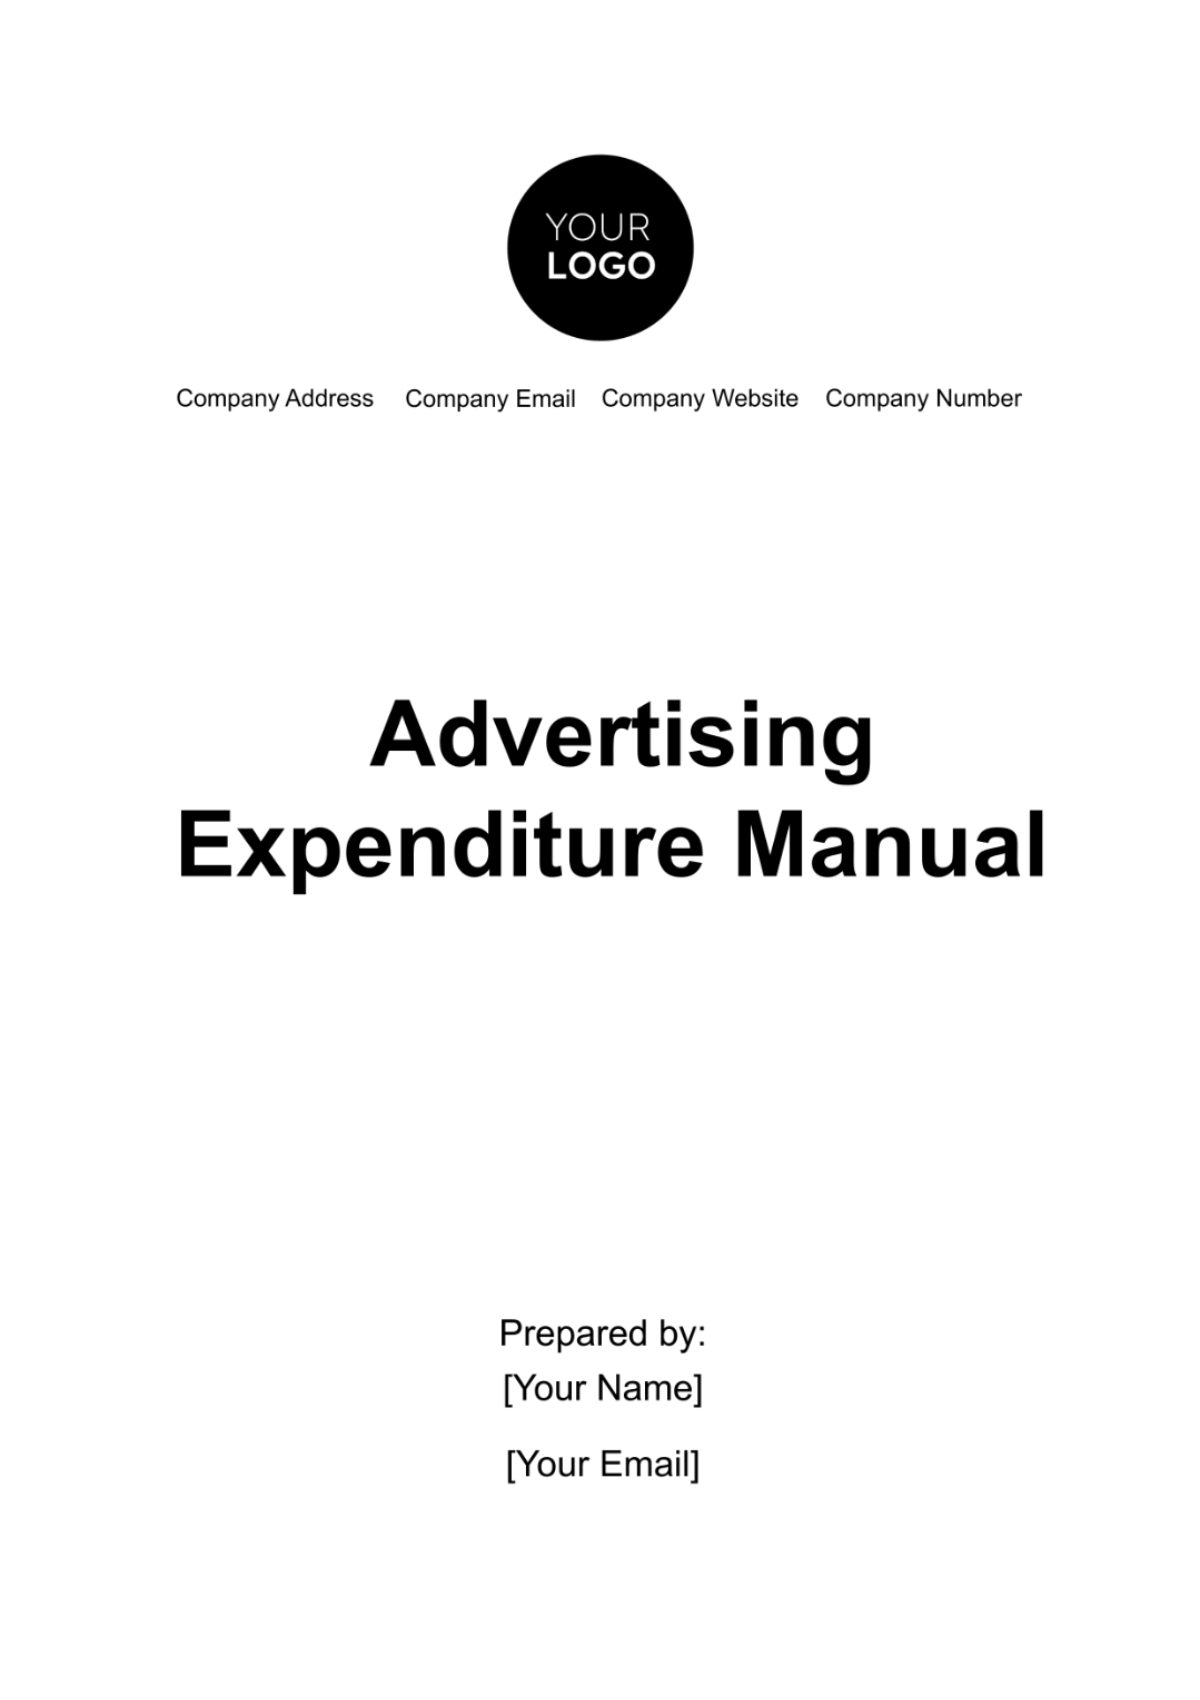 Advertising Expenditure Manual Template